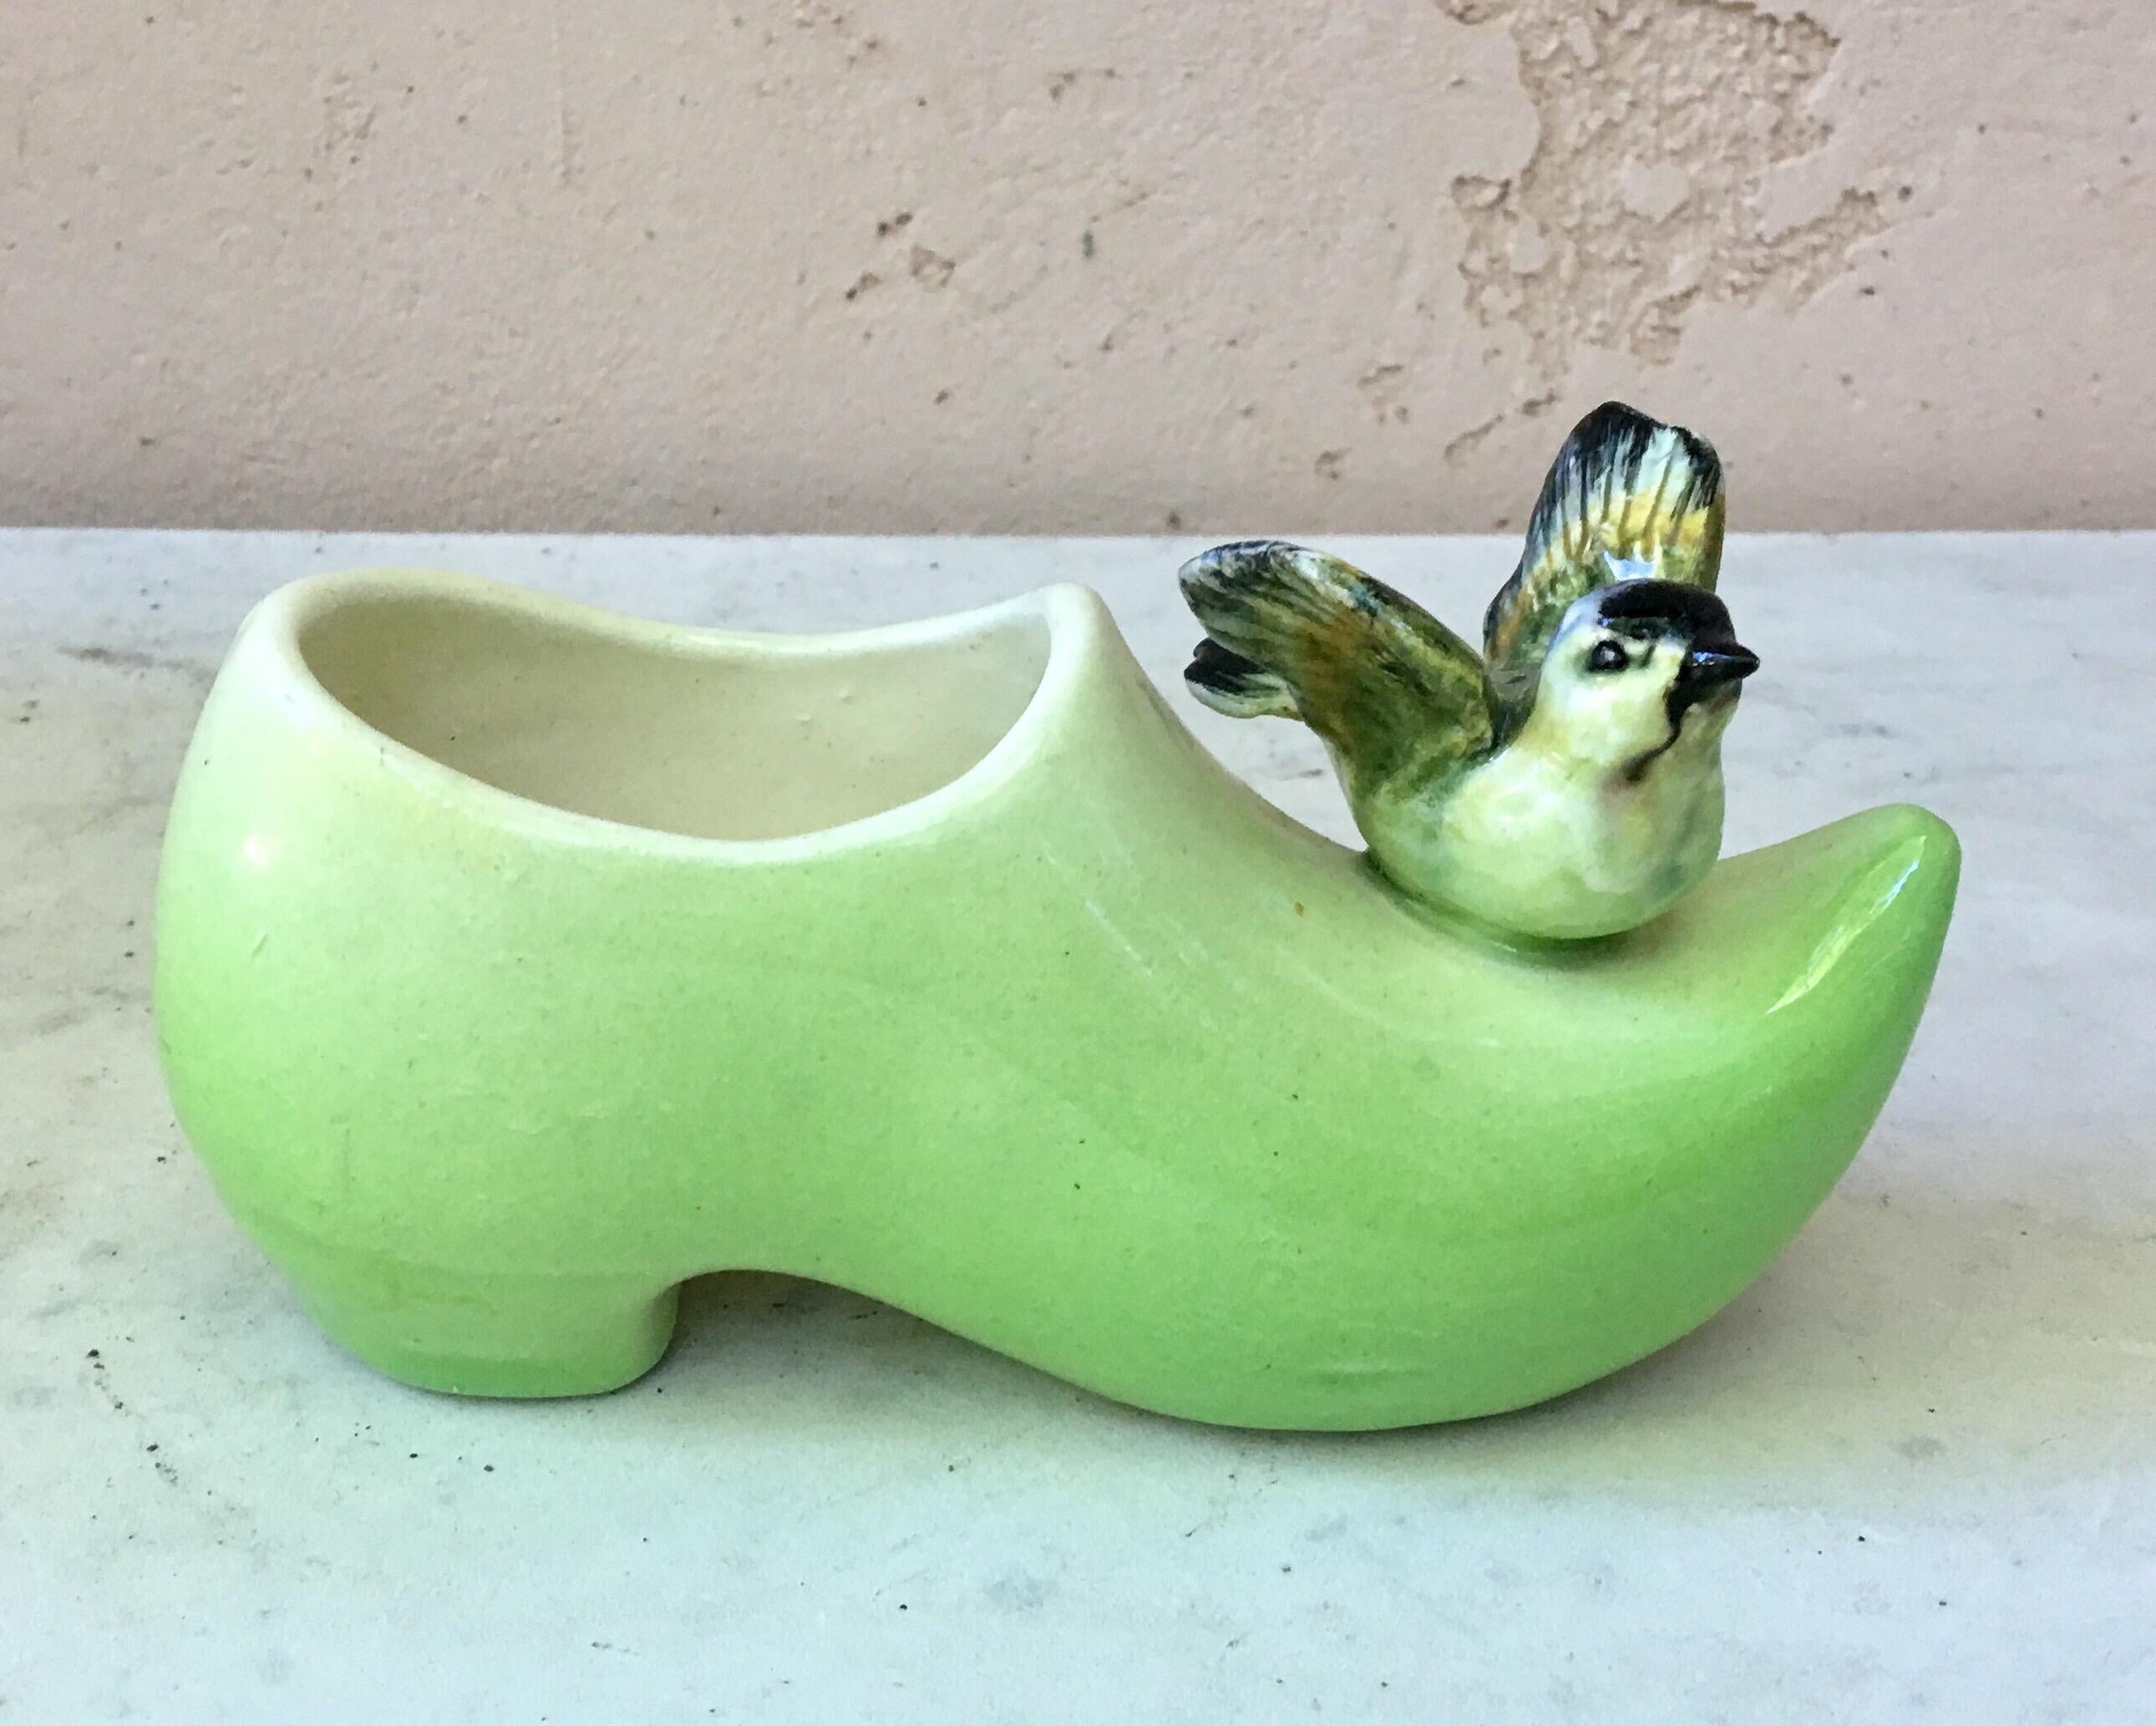 Charming Majolica clogs with birds Massier unsigned, circa 1890 (Early works are frequently unsigned).
The Massier family produced different pieces with birds in a very creative style in Vallauris on the French Riviera, they excelled in the